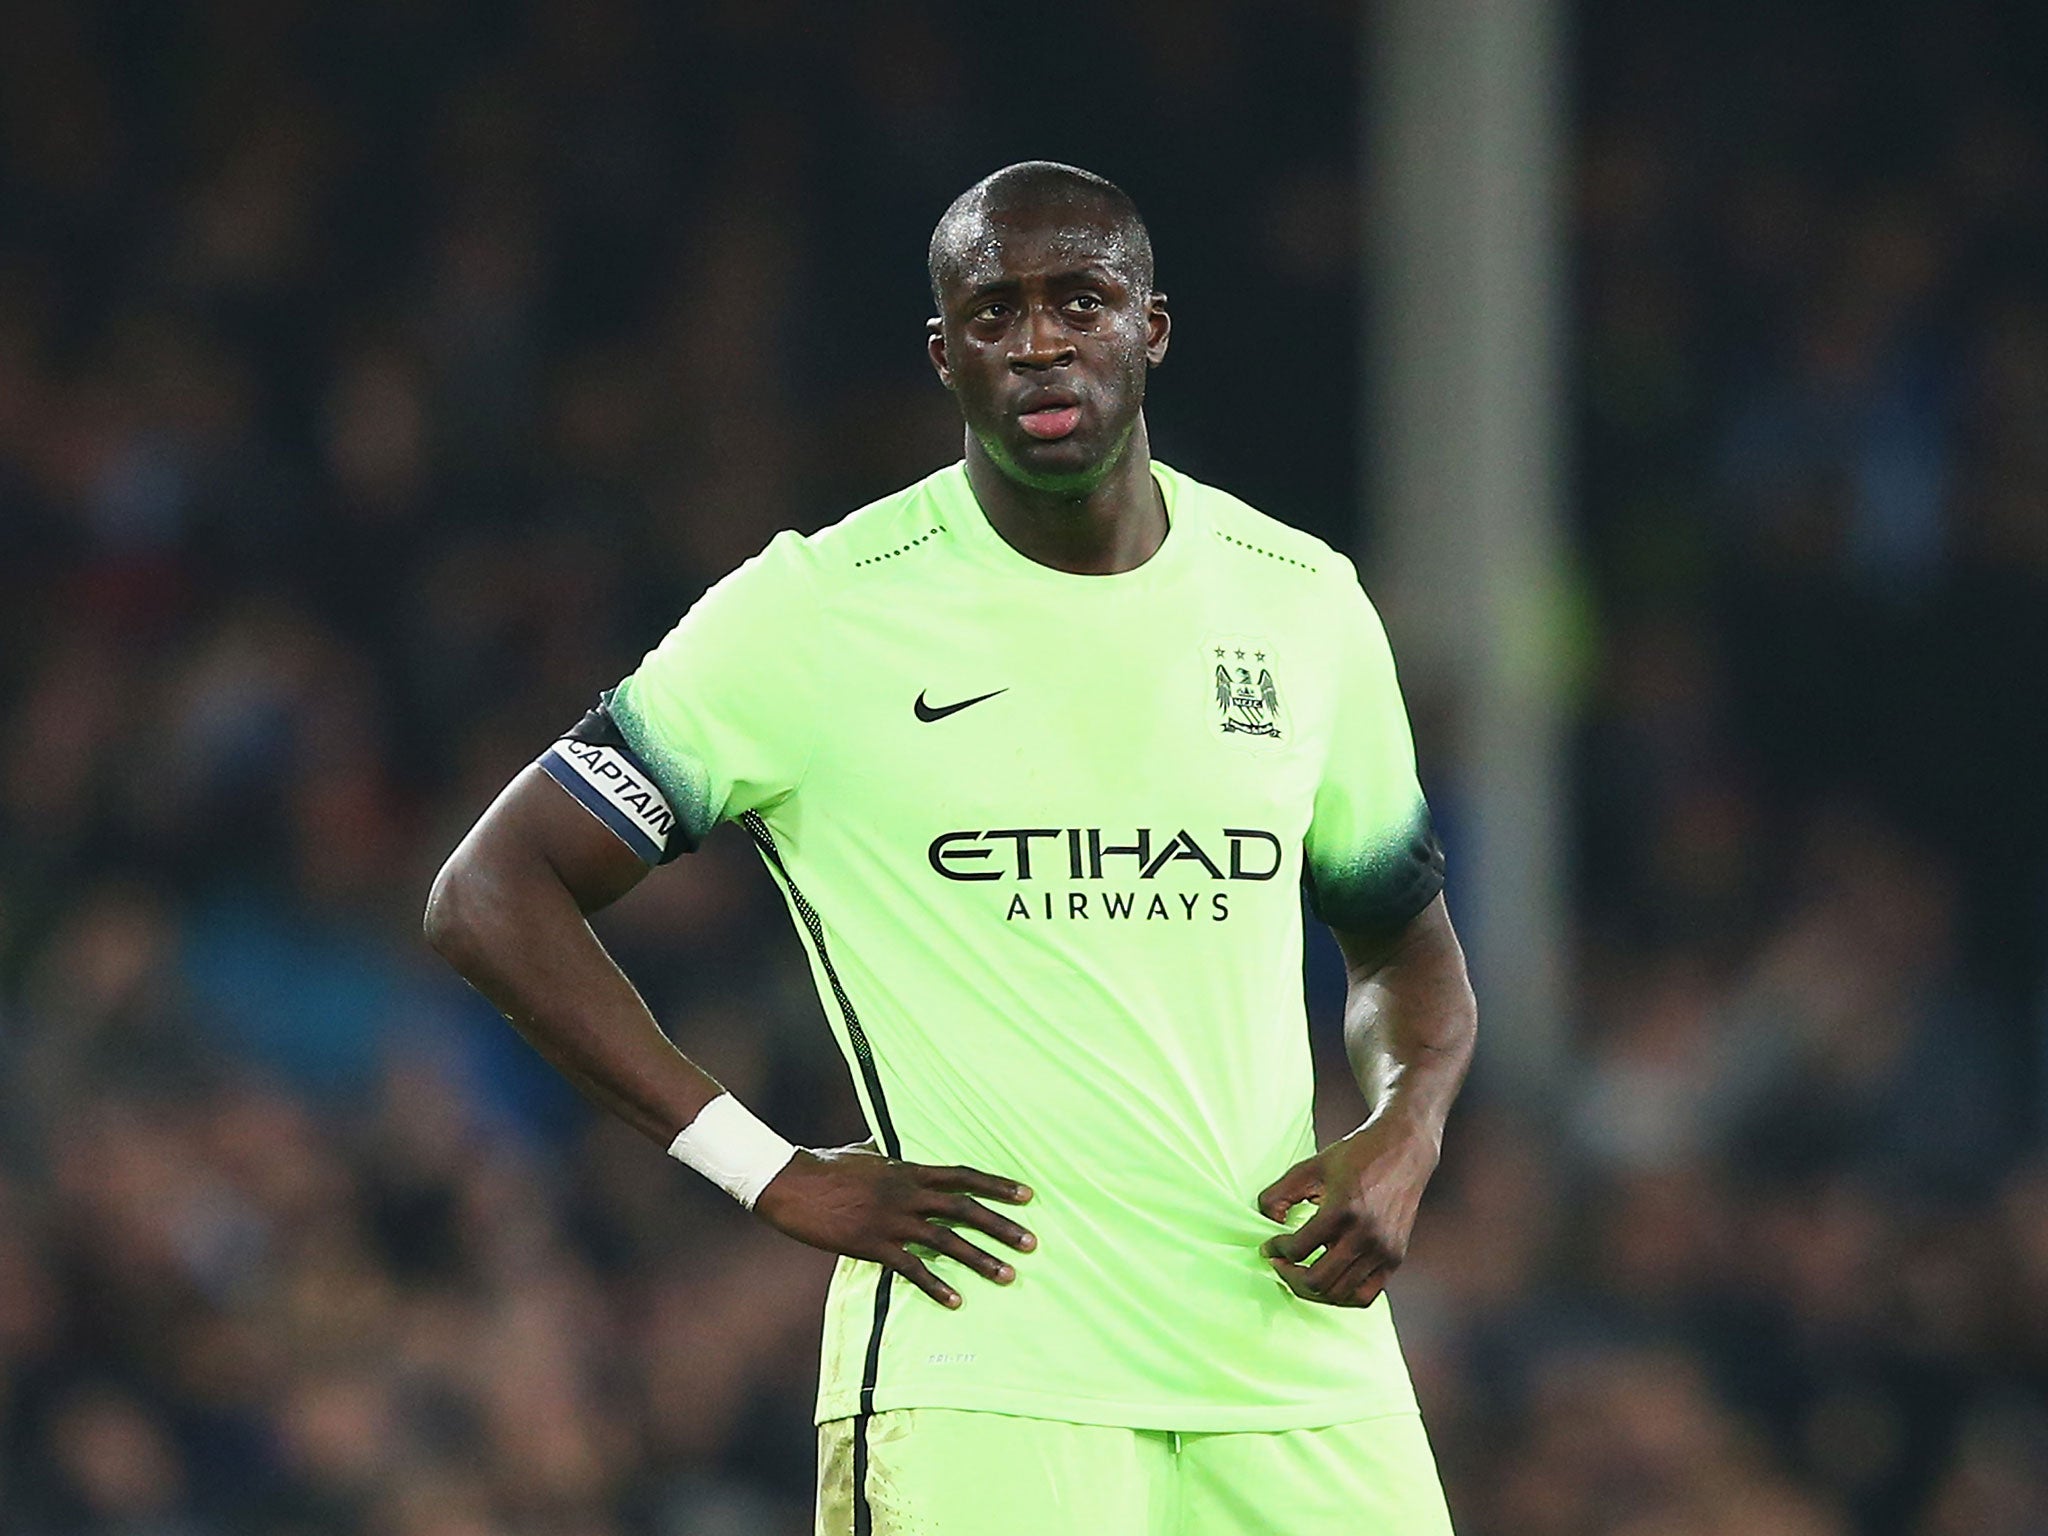 Yaya Toure will leave Manchester City in the summer, according to his agent